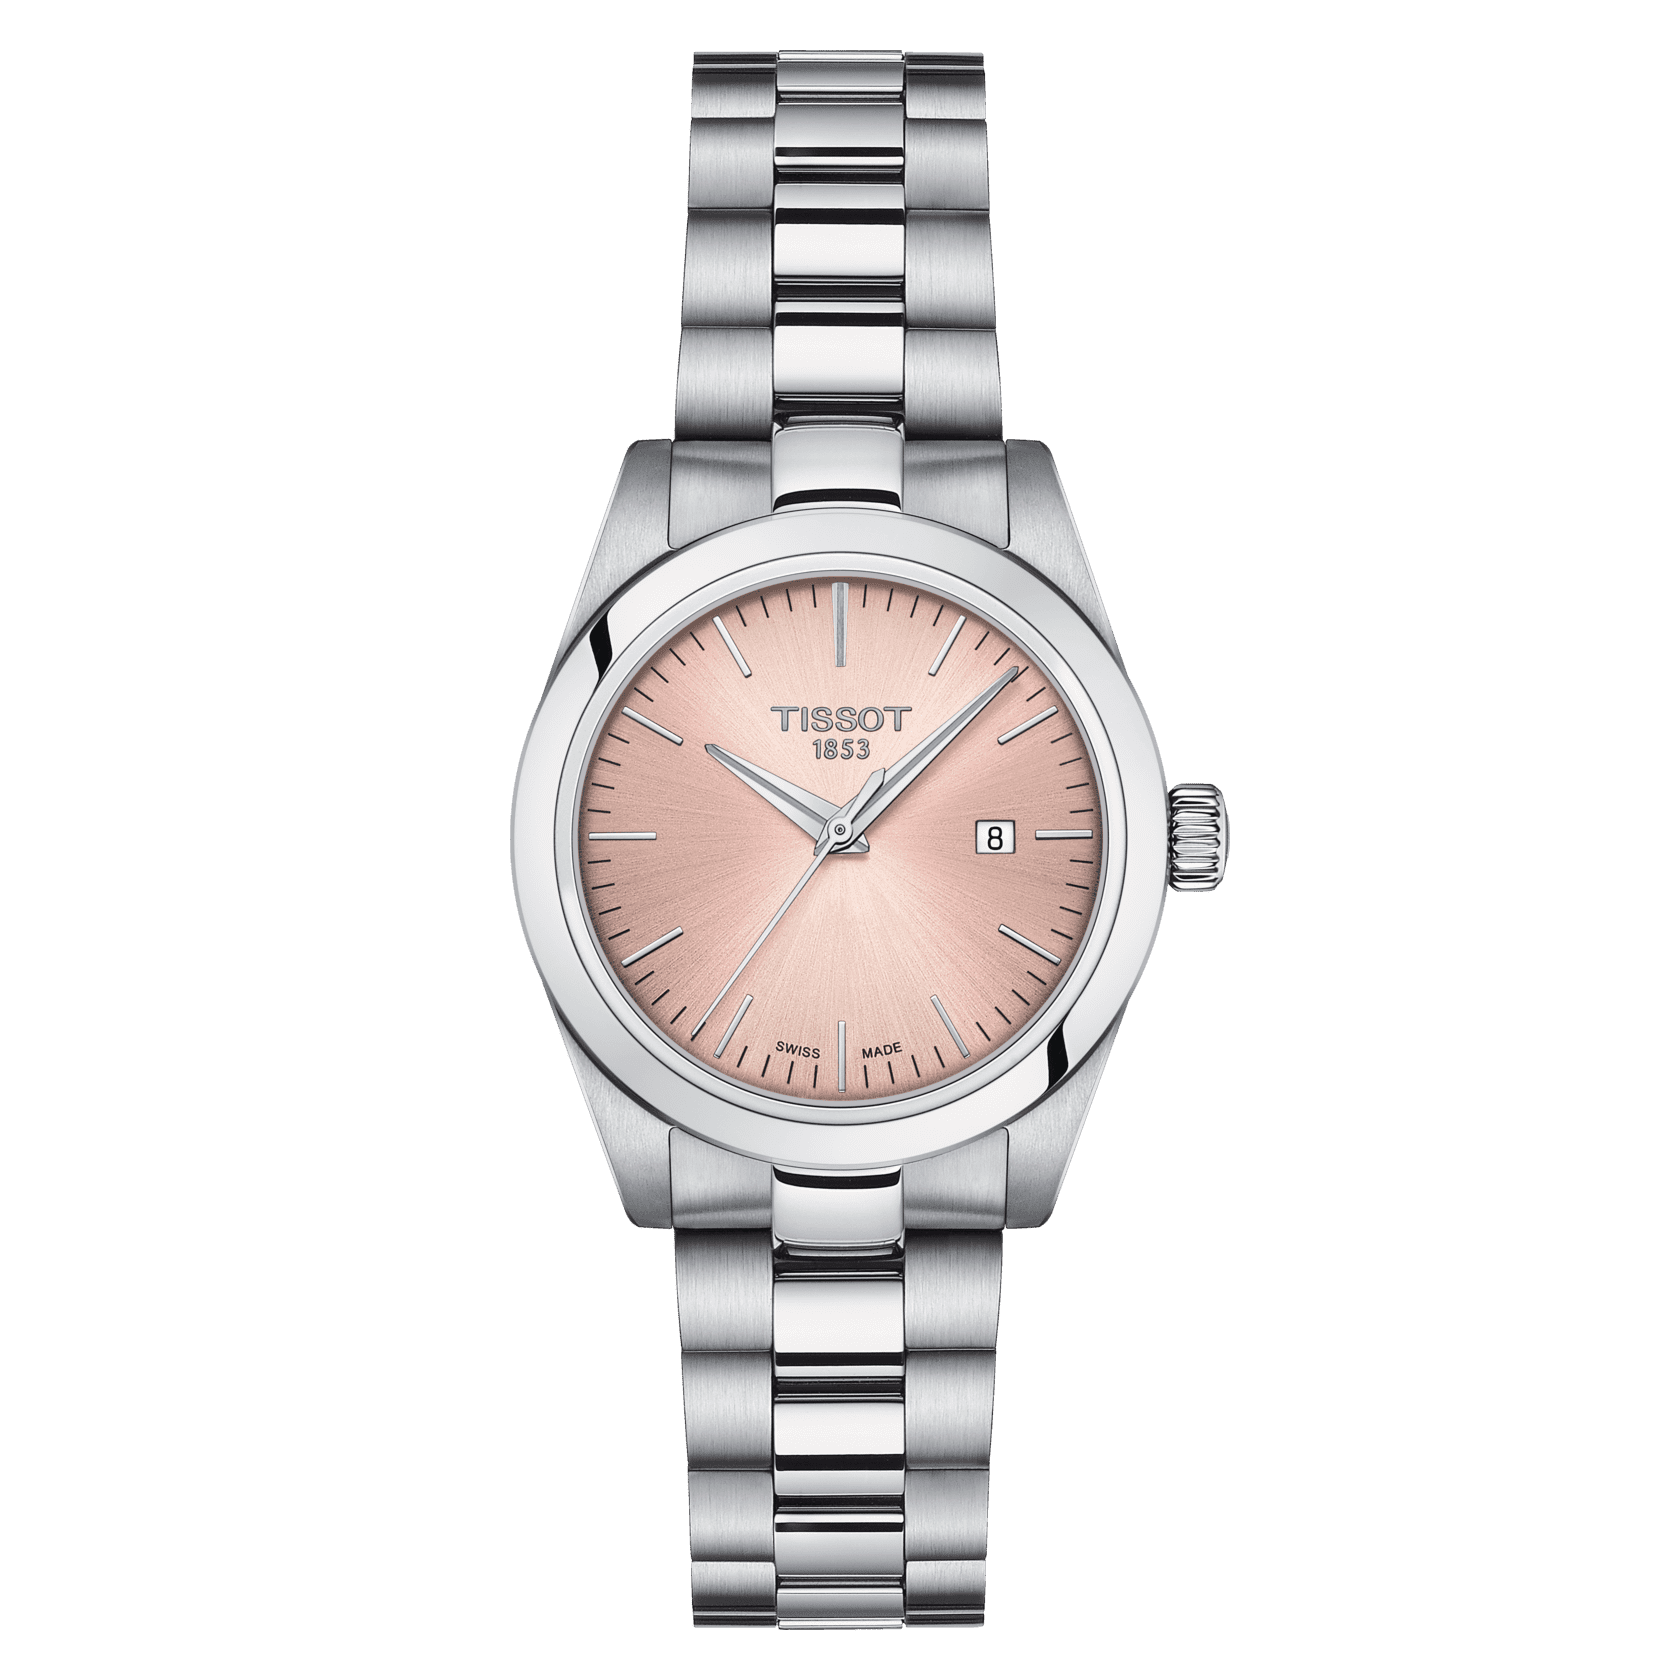 TISSOT T-MY LADY(T132.010.11.331.00)
Case:                               29Mm/ 316L Stainless Steel Case
Crystal:                             Domed Scratch-Resistant Sapphire Crystal
Movement:                      Swiss Quartz/Eta F03.111
Functions: